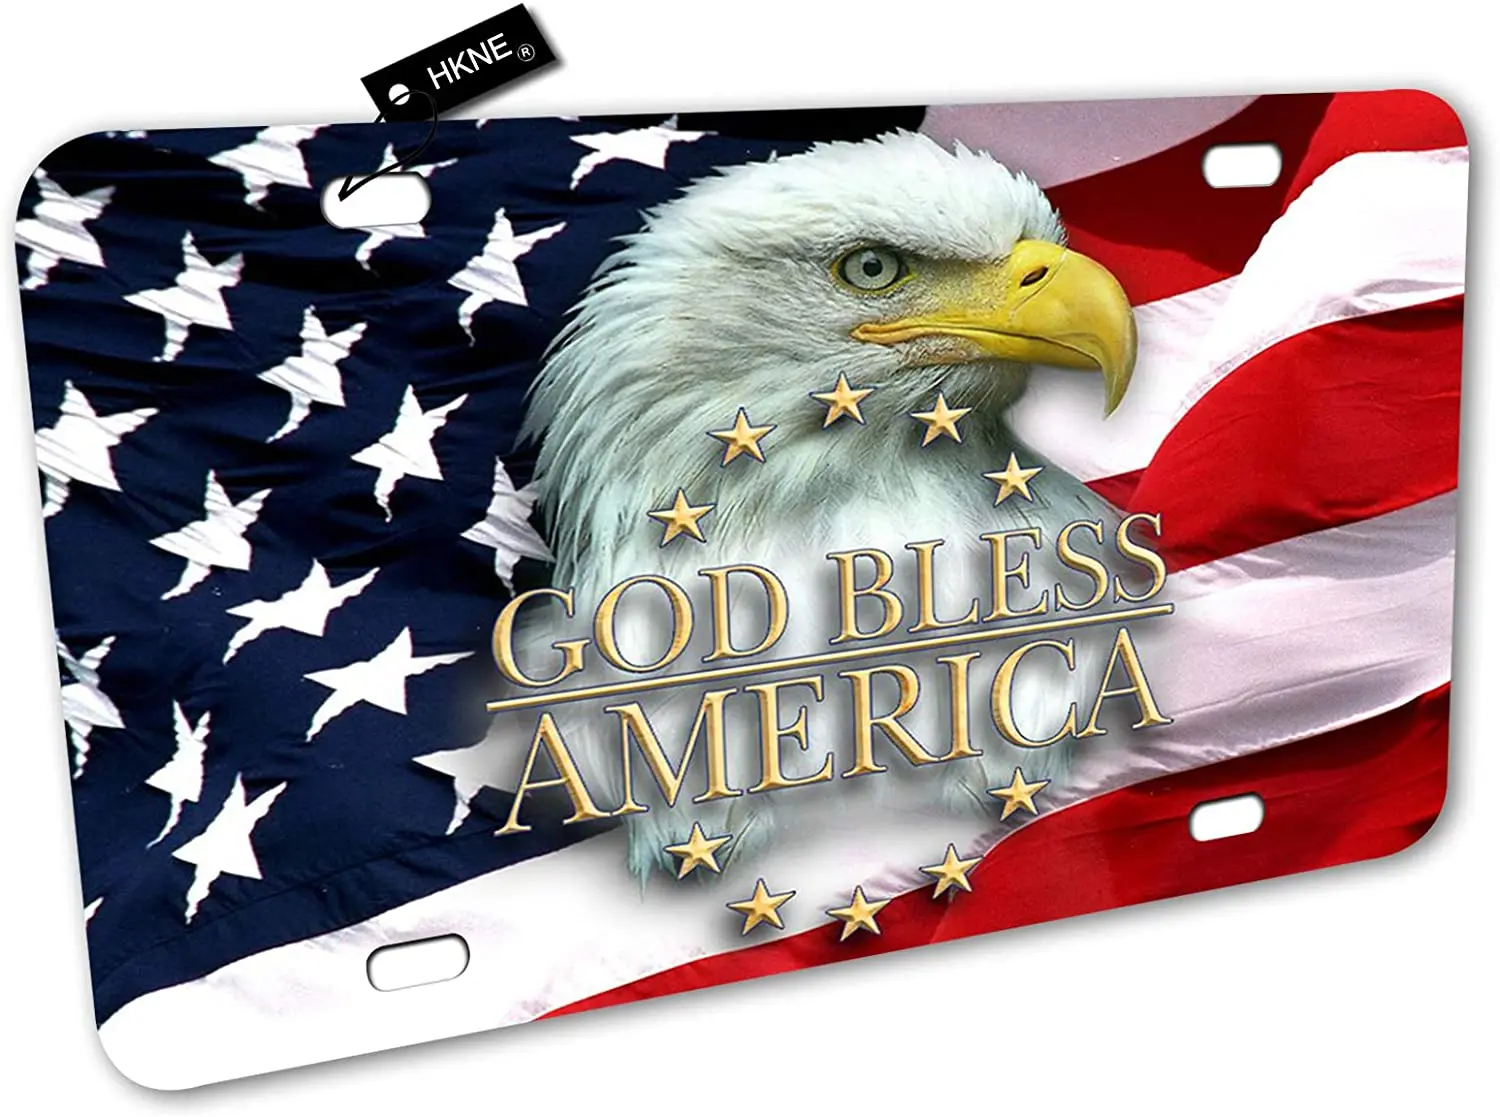 

American Flag Eagle God Bless America License Plate Front Aluminum Metal License Plate Auto Car Tag Novelty Home Decor Signs